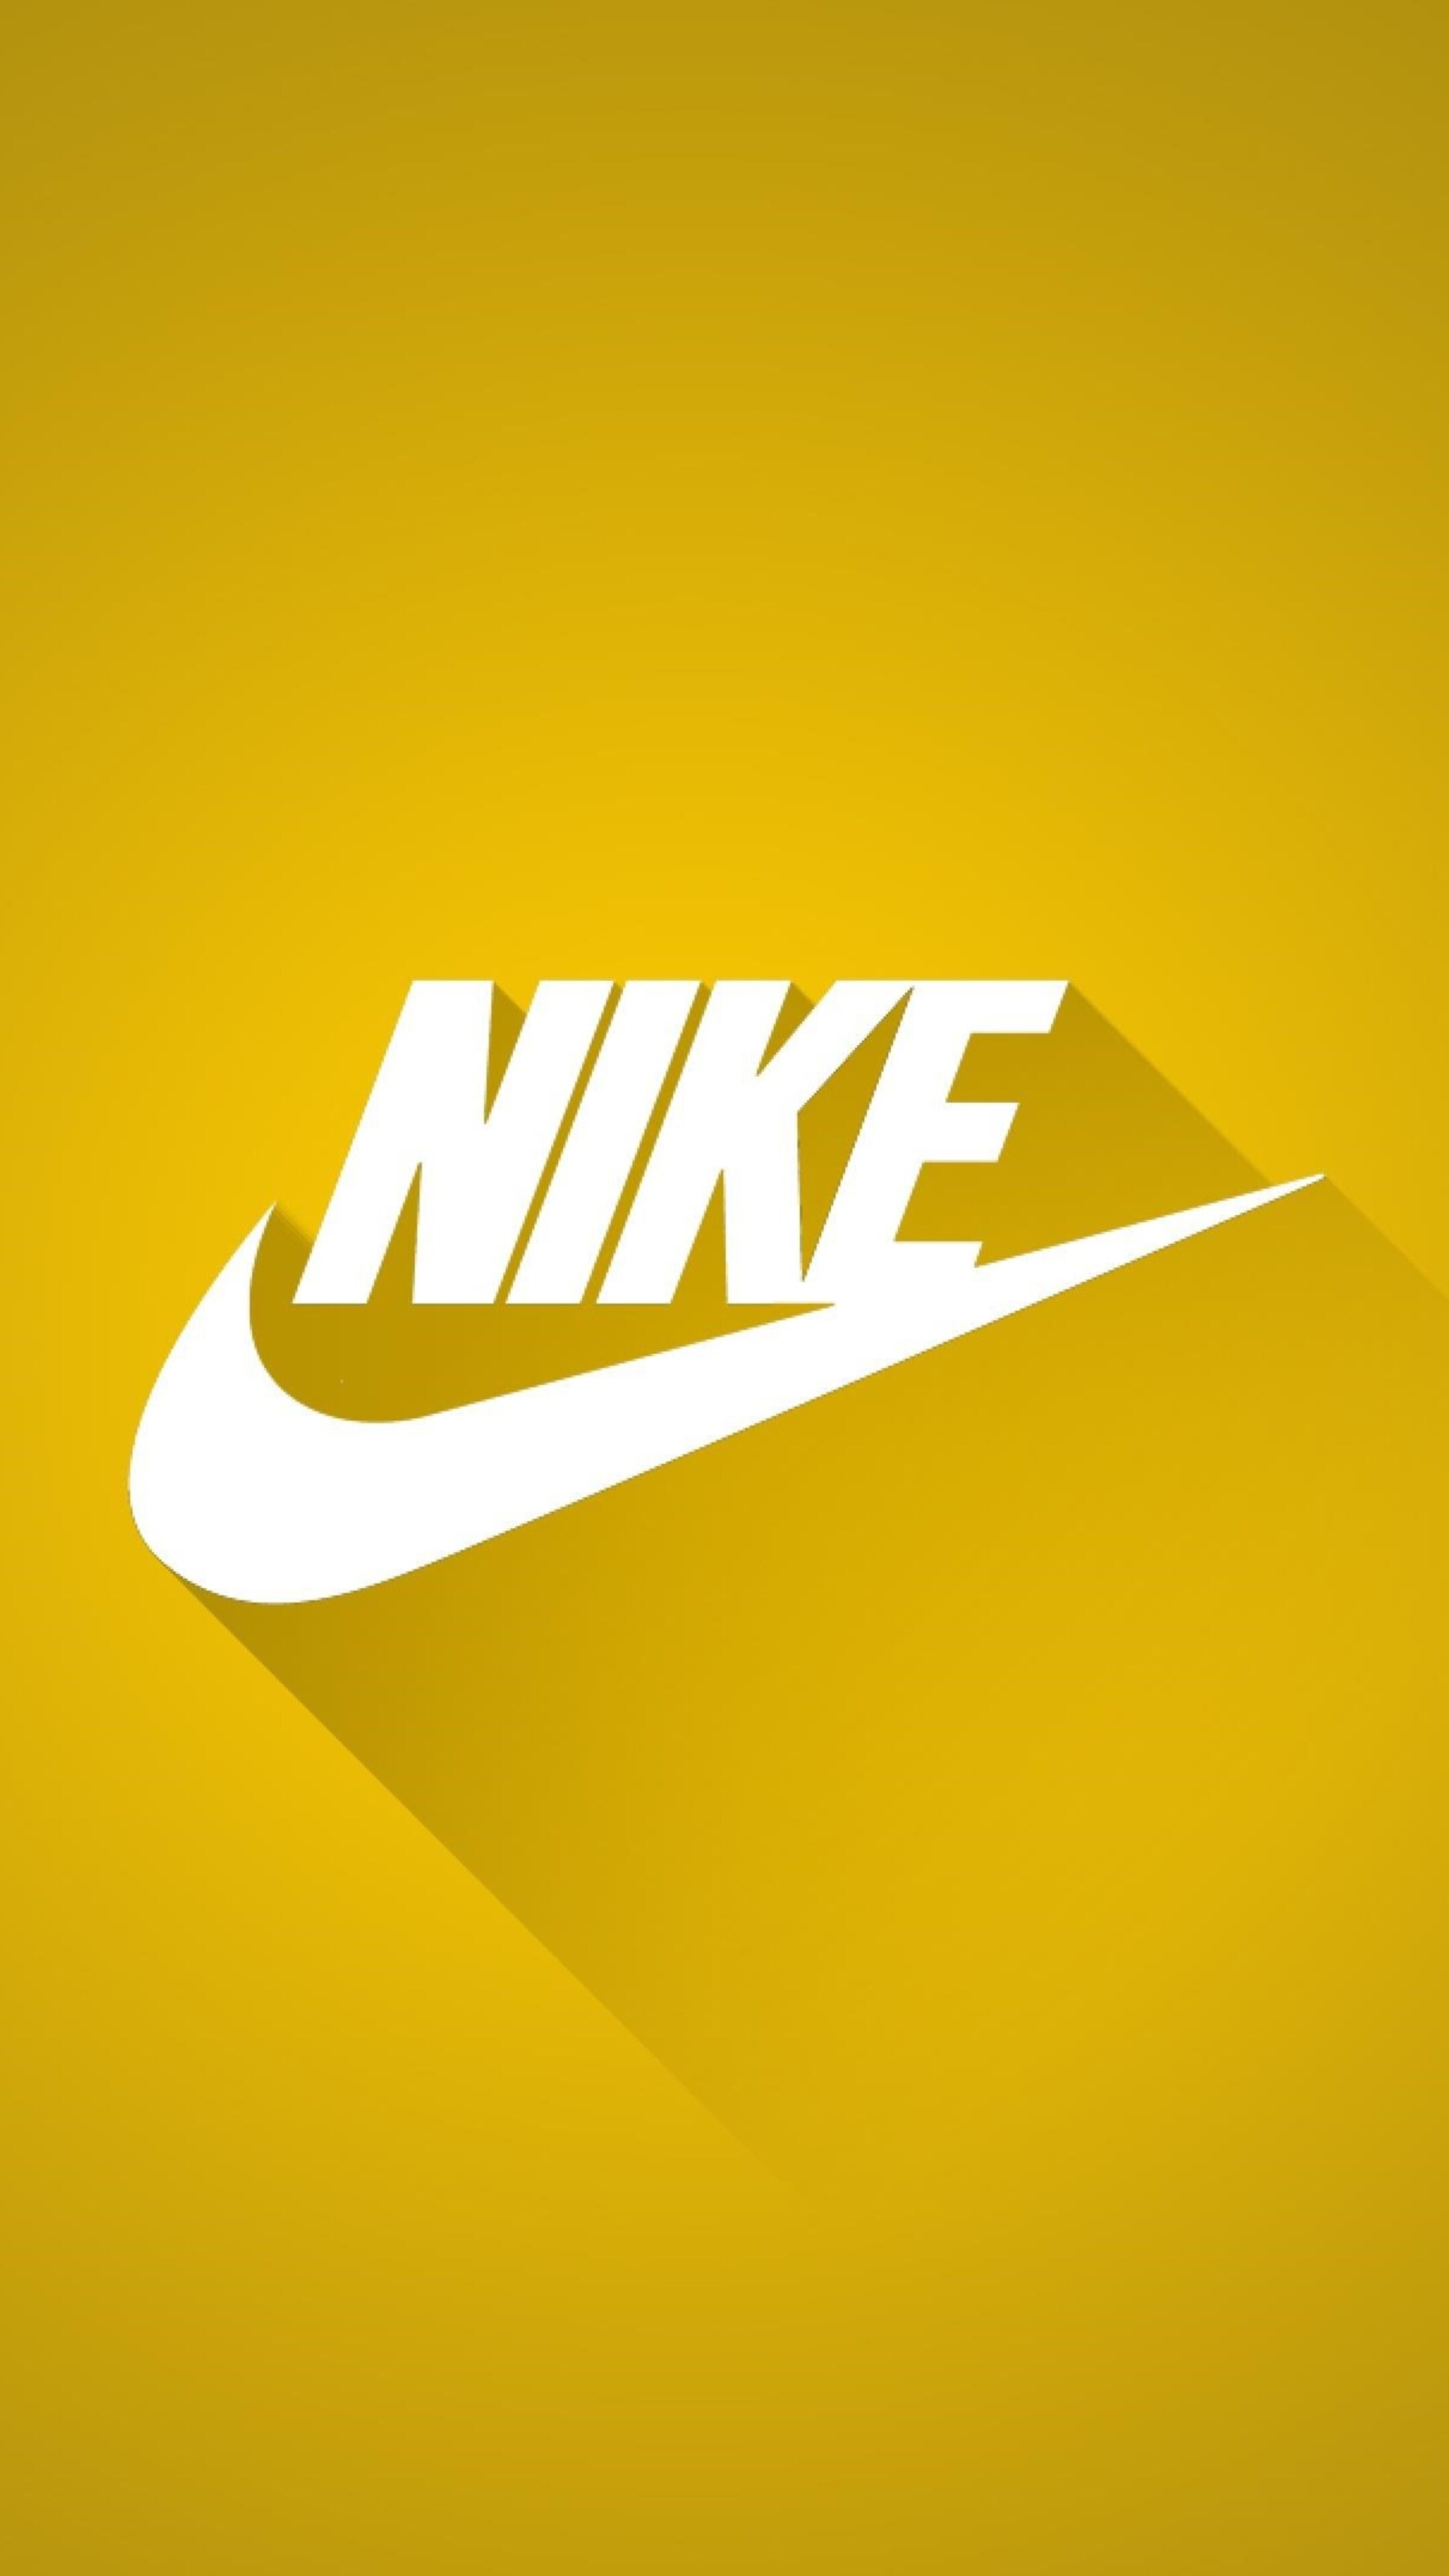 Nike logo, Sony Xperia HD wallpapers, 4K images, Sports brand, 2160x3840 4K Handy